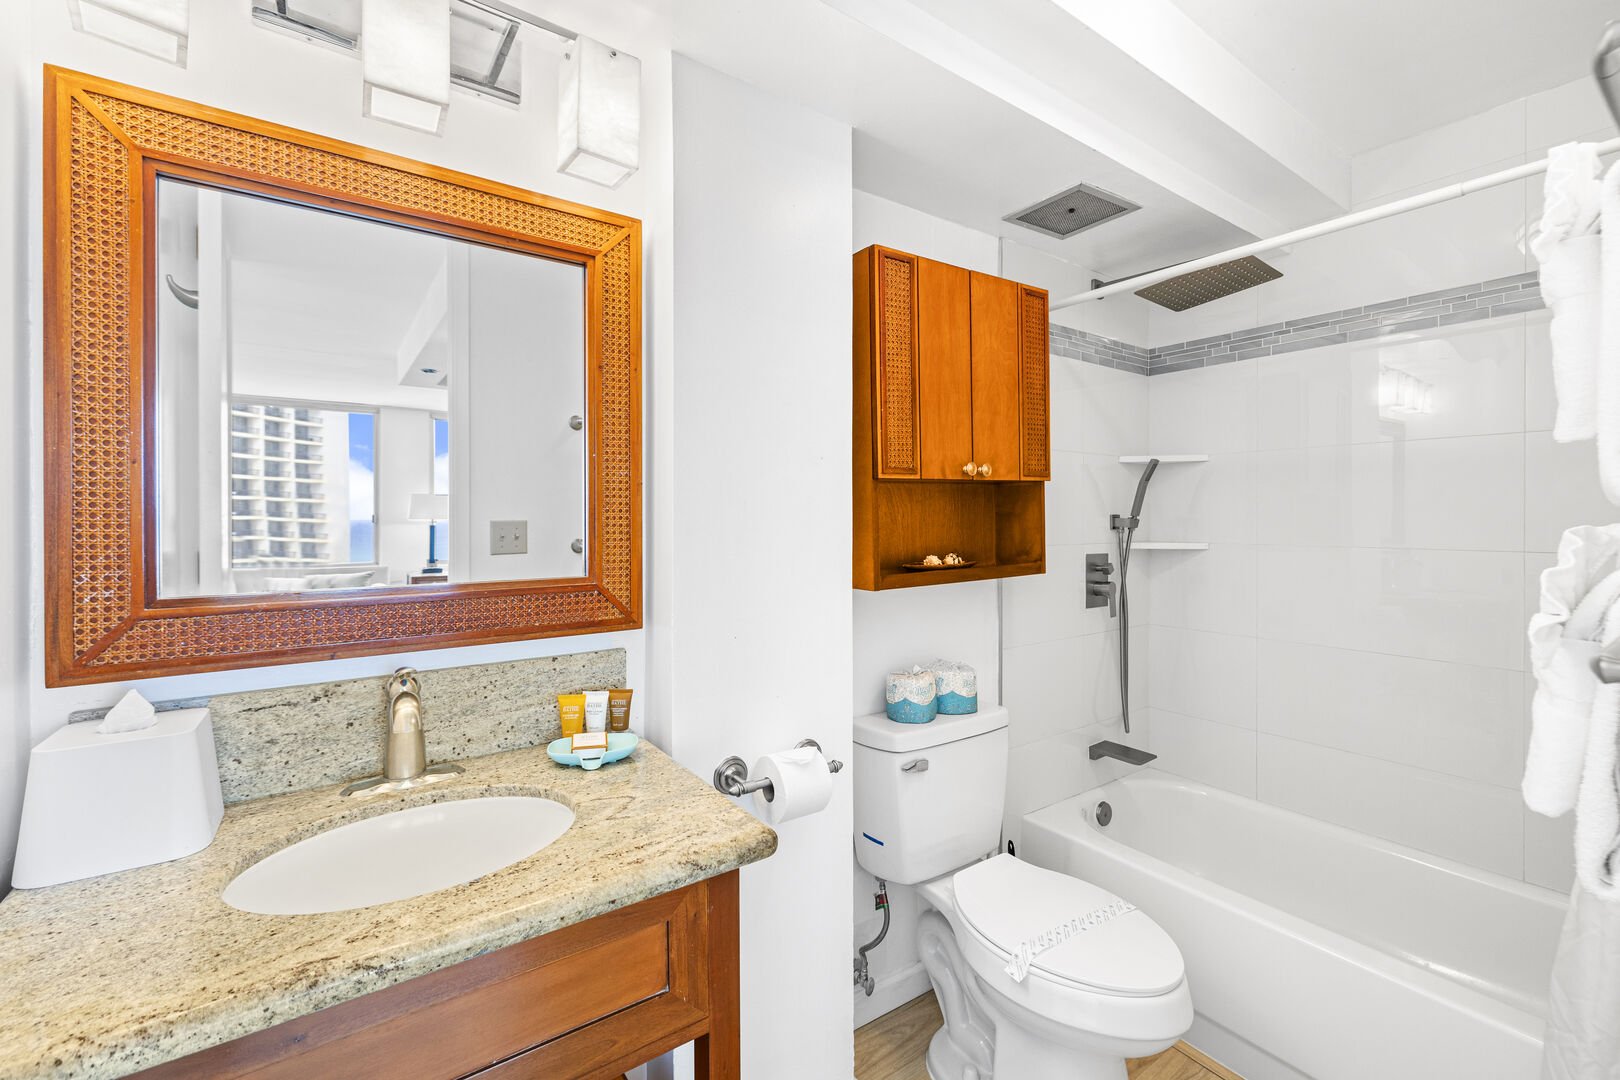 The full bathroom features a shower/tub combination for your convenience!